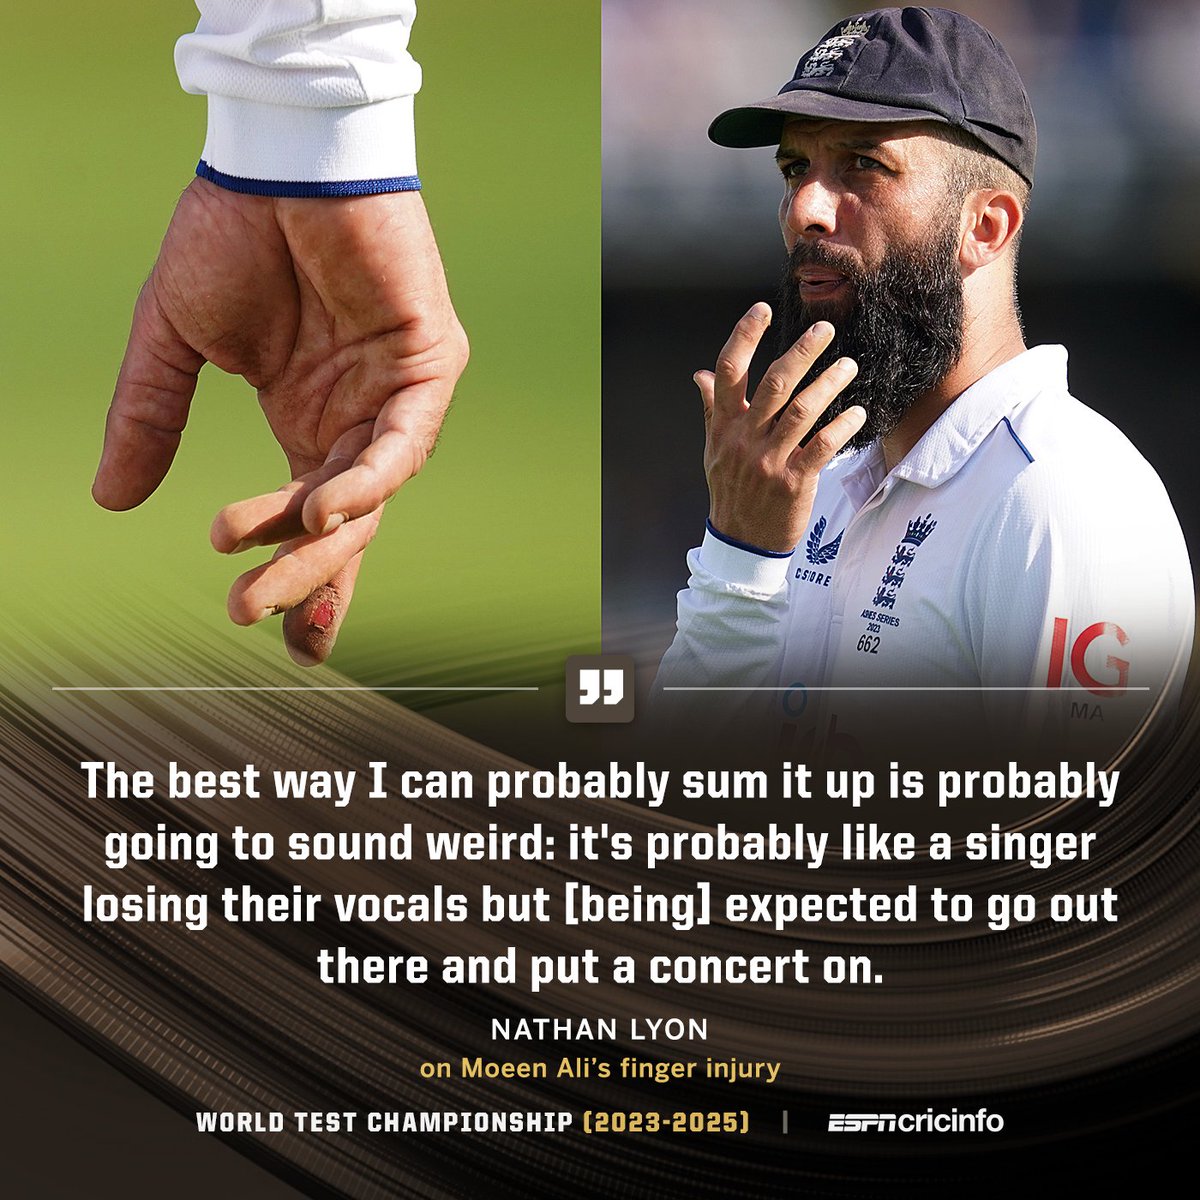 As a fellow offspinner, Nathan Lyon has 'a lot of sympathy' for Moeen Ali's hurt finger 😢

#ENGvAUS | #Ashes